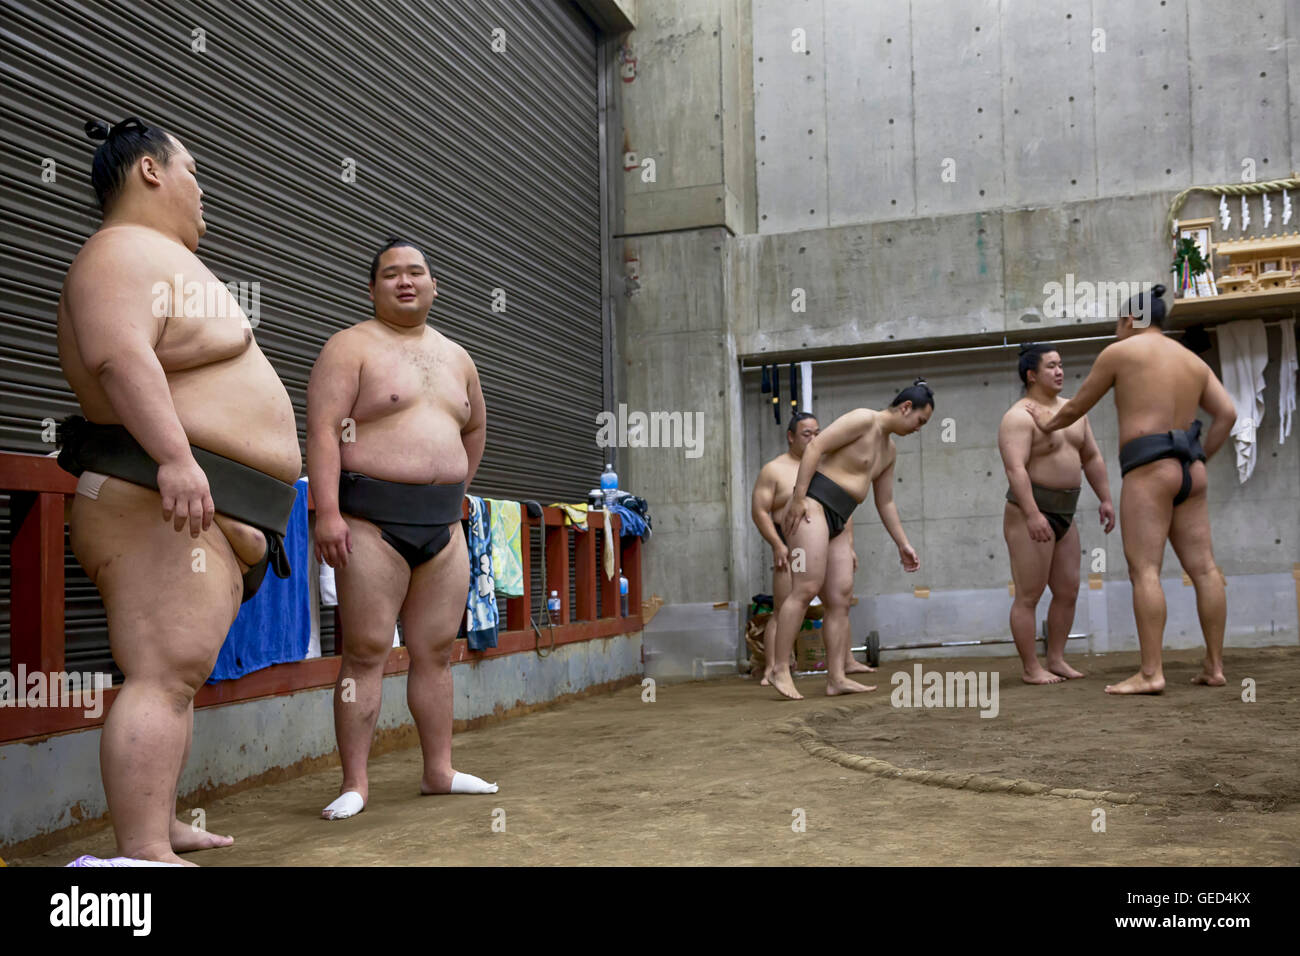 TOKYO, JAPAN - May 18, 2016: Japanese sumo wrestler training in their stall in Tokyo Stock Photo